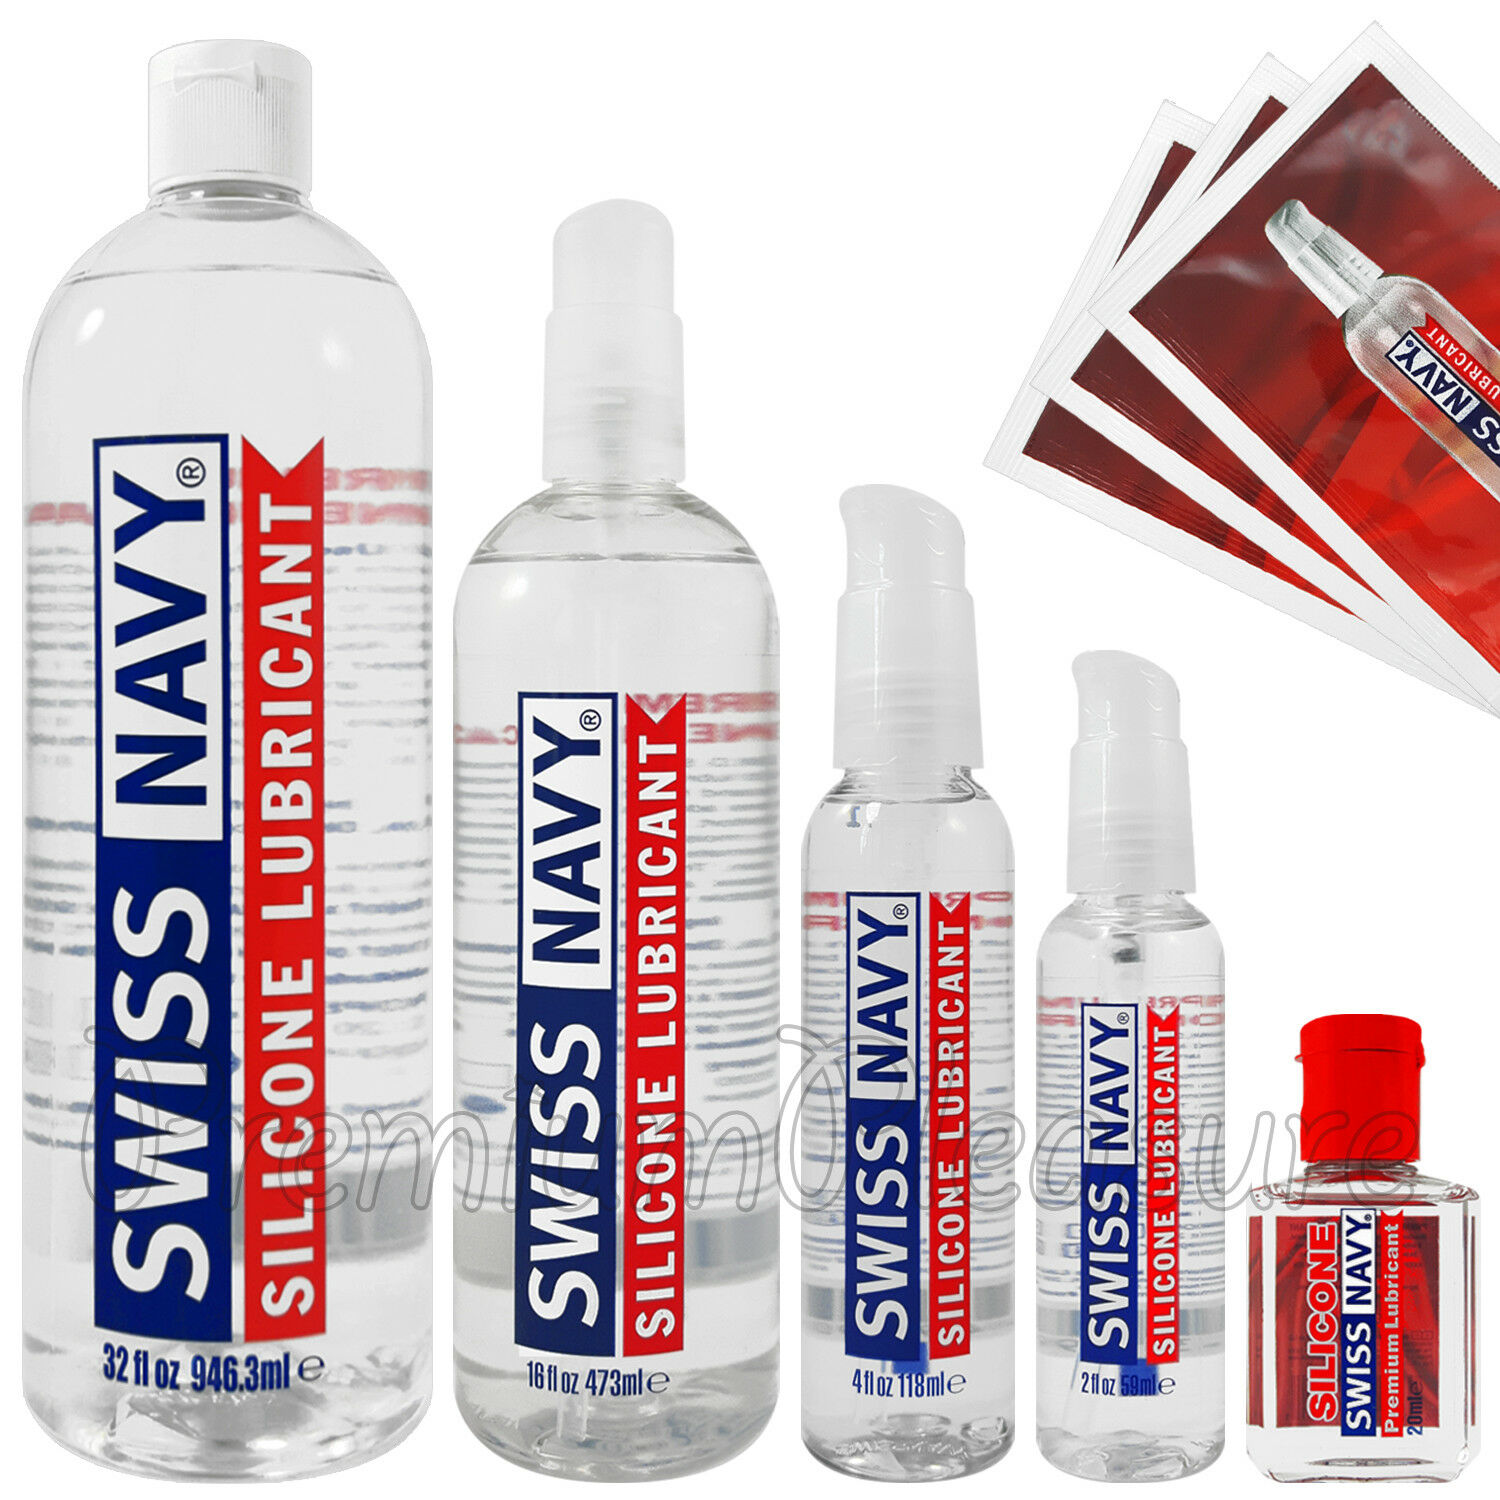 Swiss Navy Silicone Lubricant Premium Silicone-based Sex Lube Personal Glide Usa